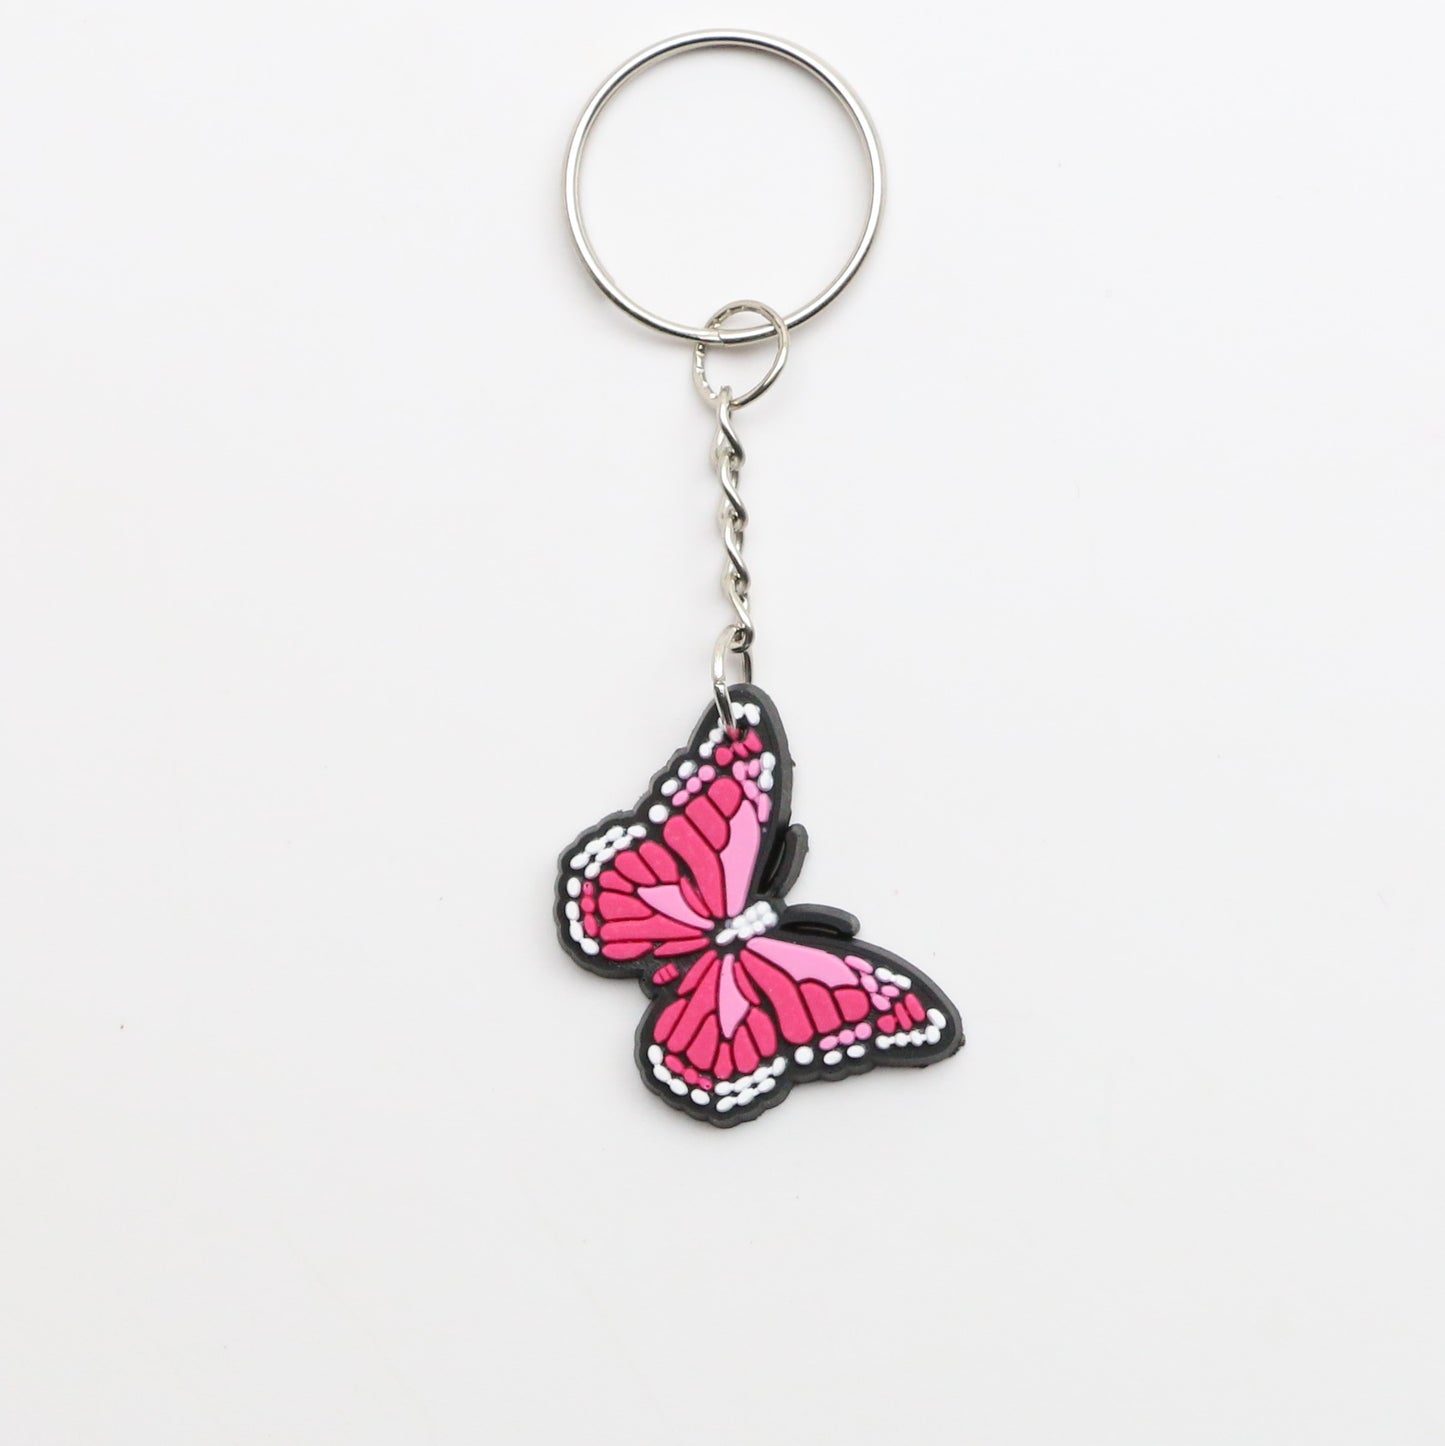 8100307K - Charm - Keychain - Butterfly - Sm. - Pink